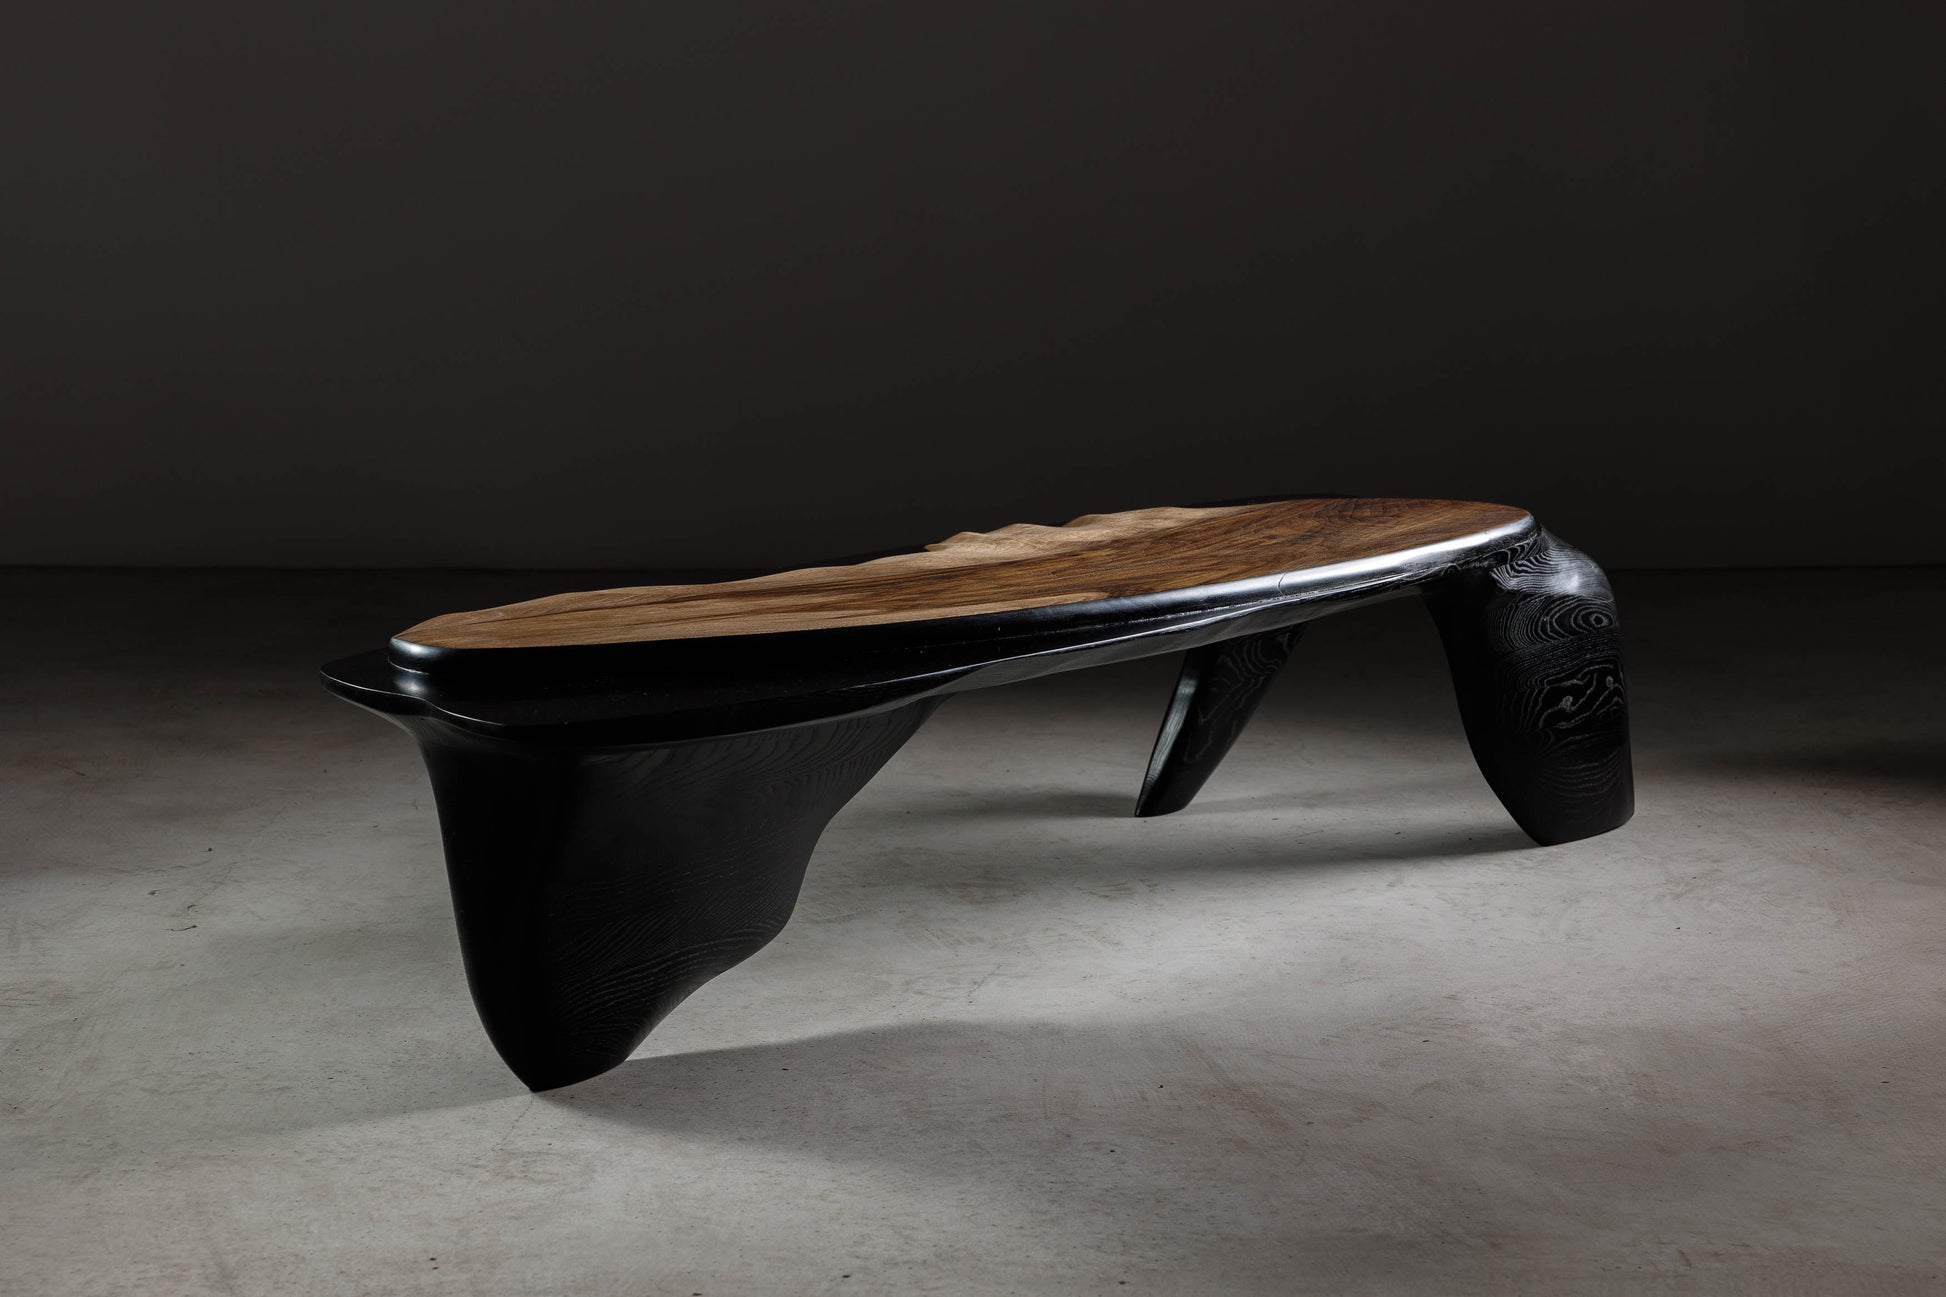 Sculptural Walnut Coffee Table EM110 Part Of Erosio Collection | Perspective image showing the fluid lines of this unique coffee table.